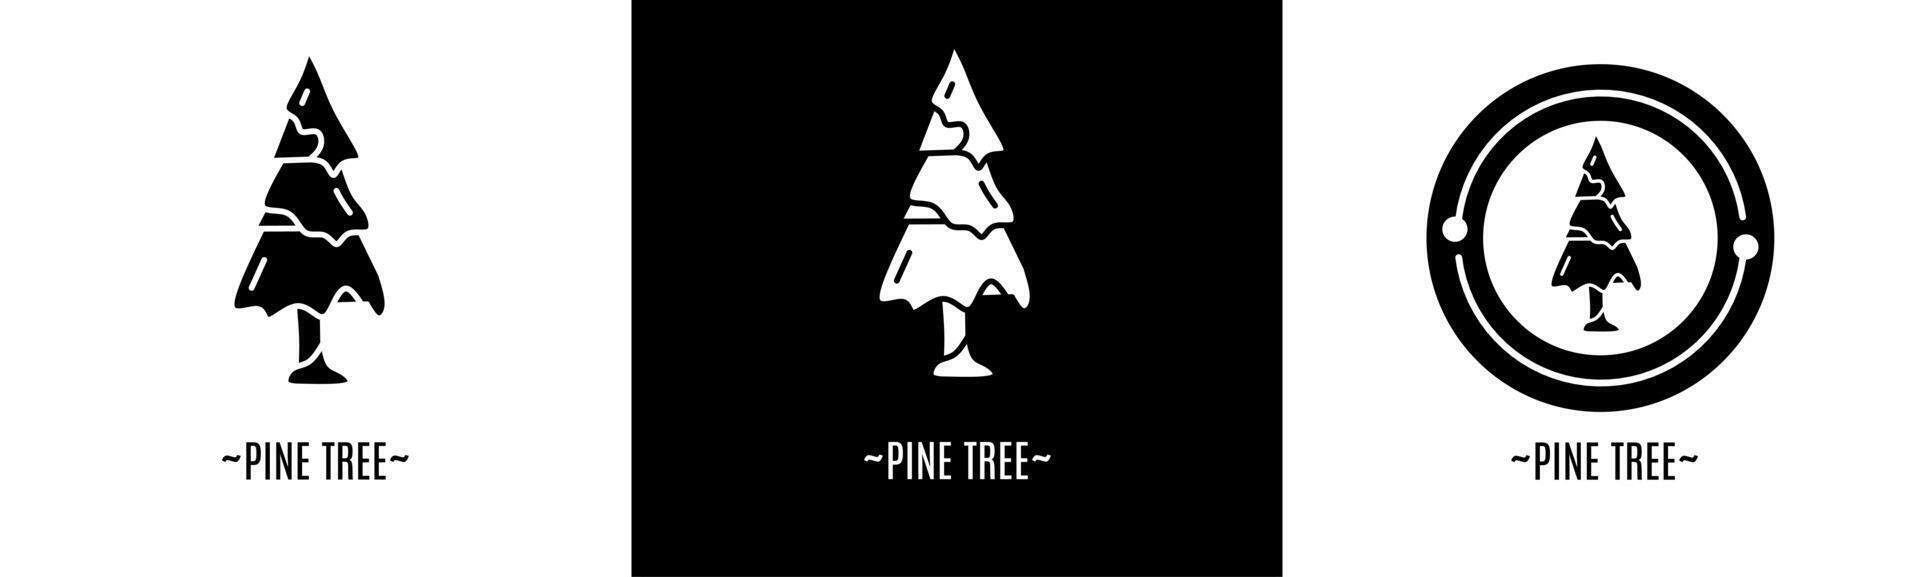 Pine tree logo set. Collection of black and white logos. Stock vector. vector